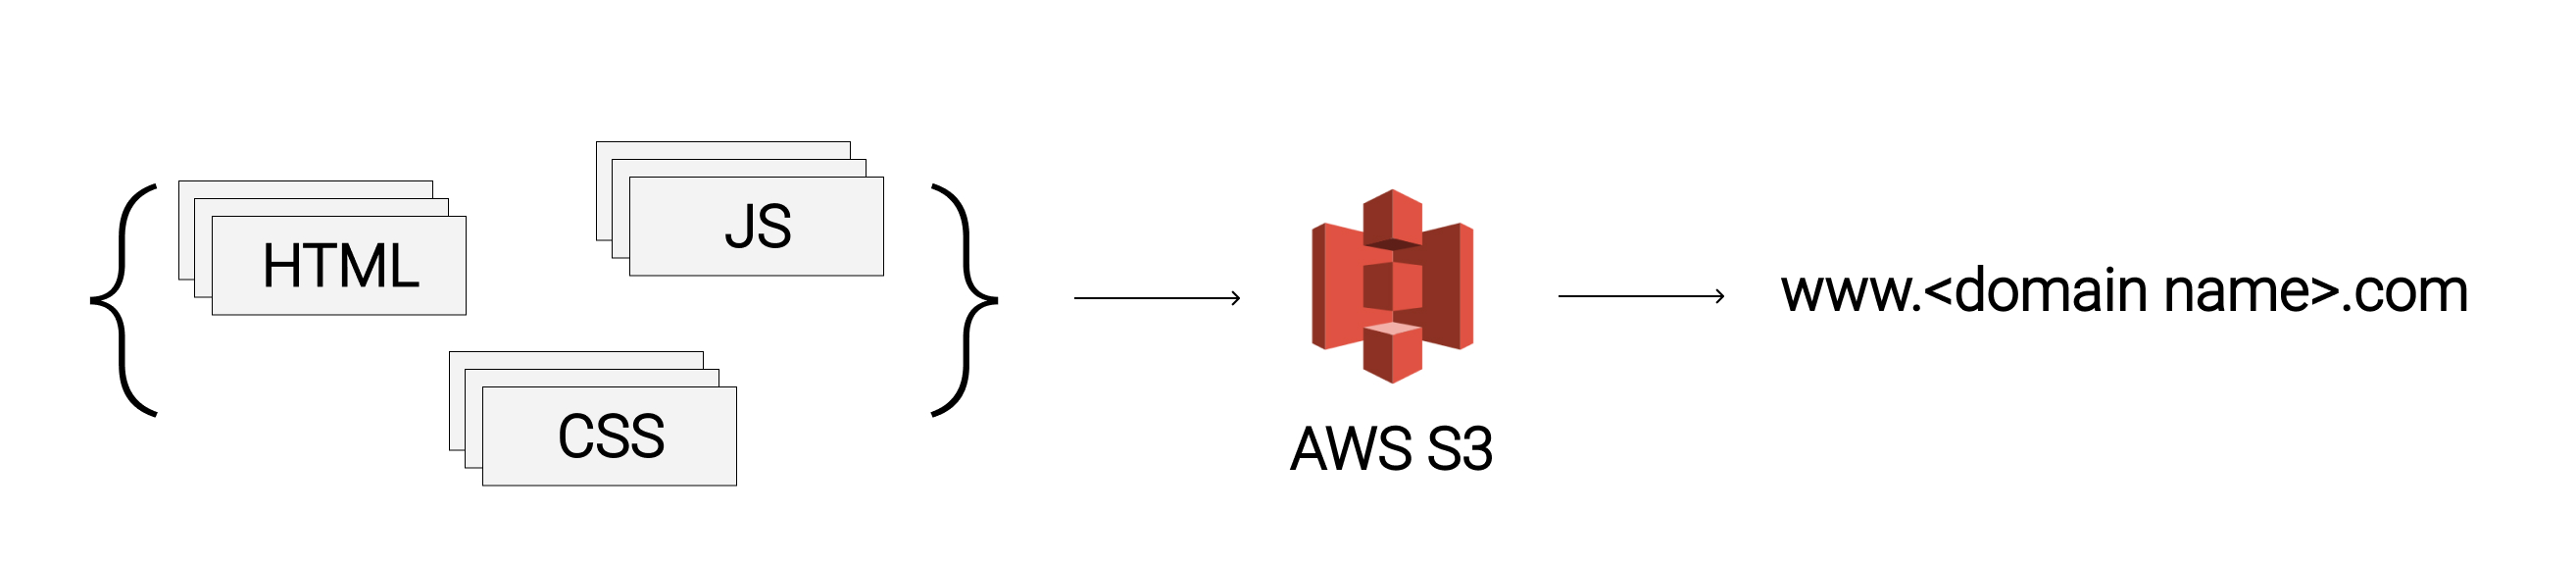 AWS Frontend Architecture